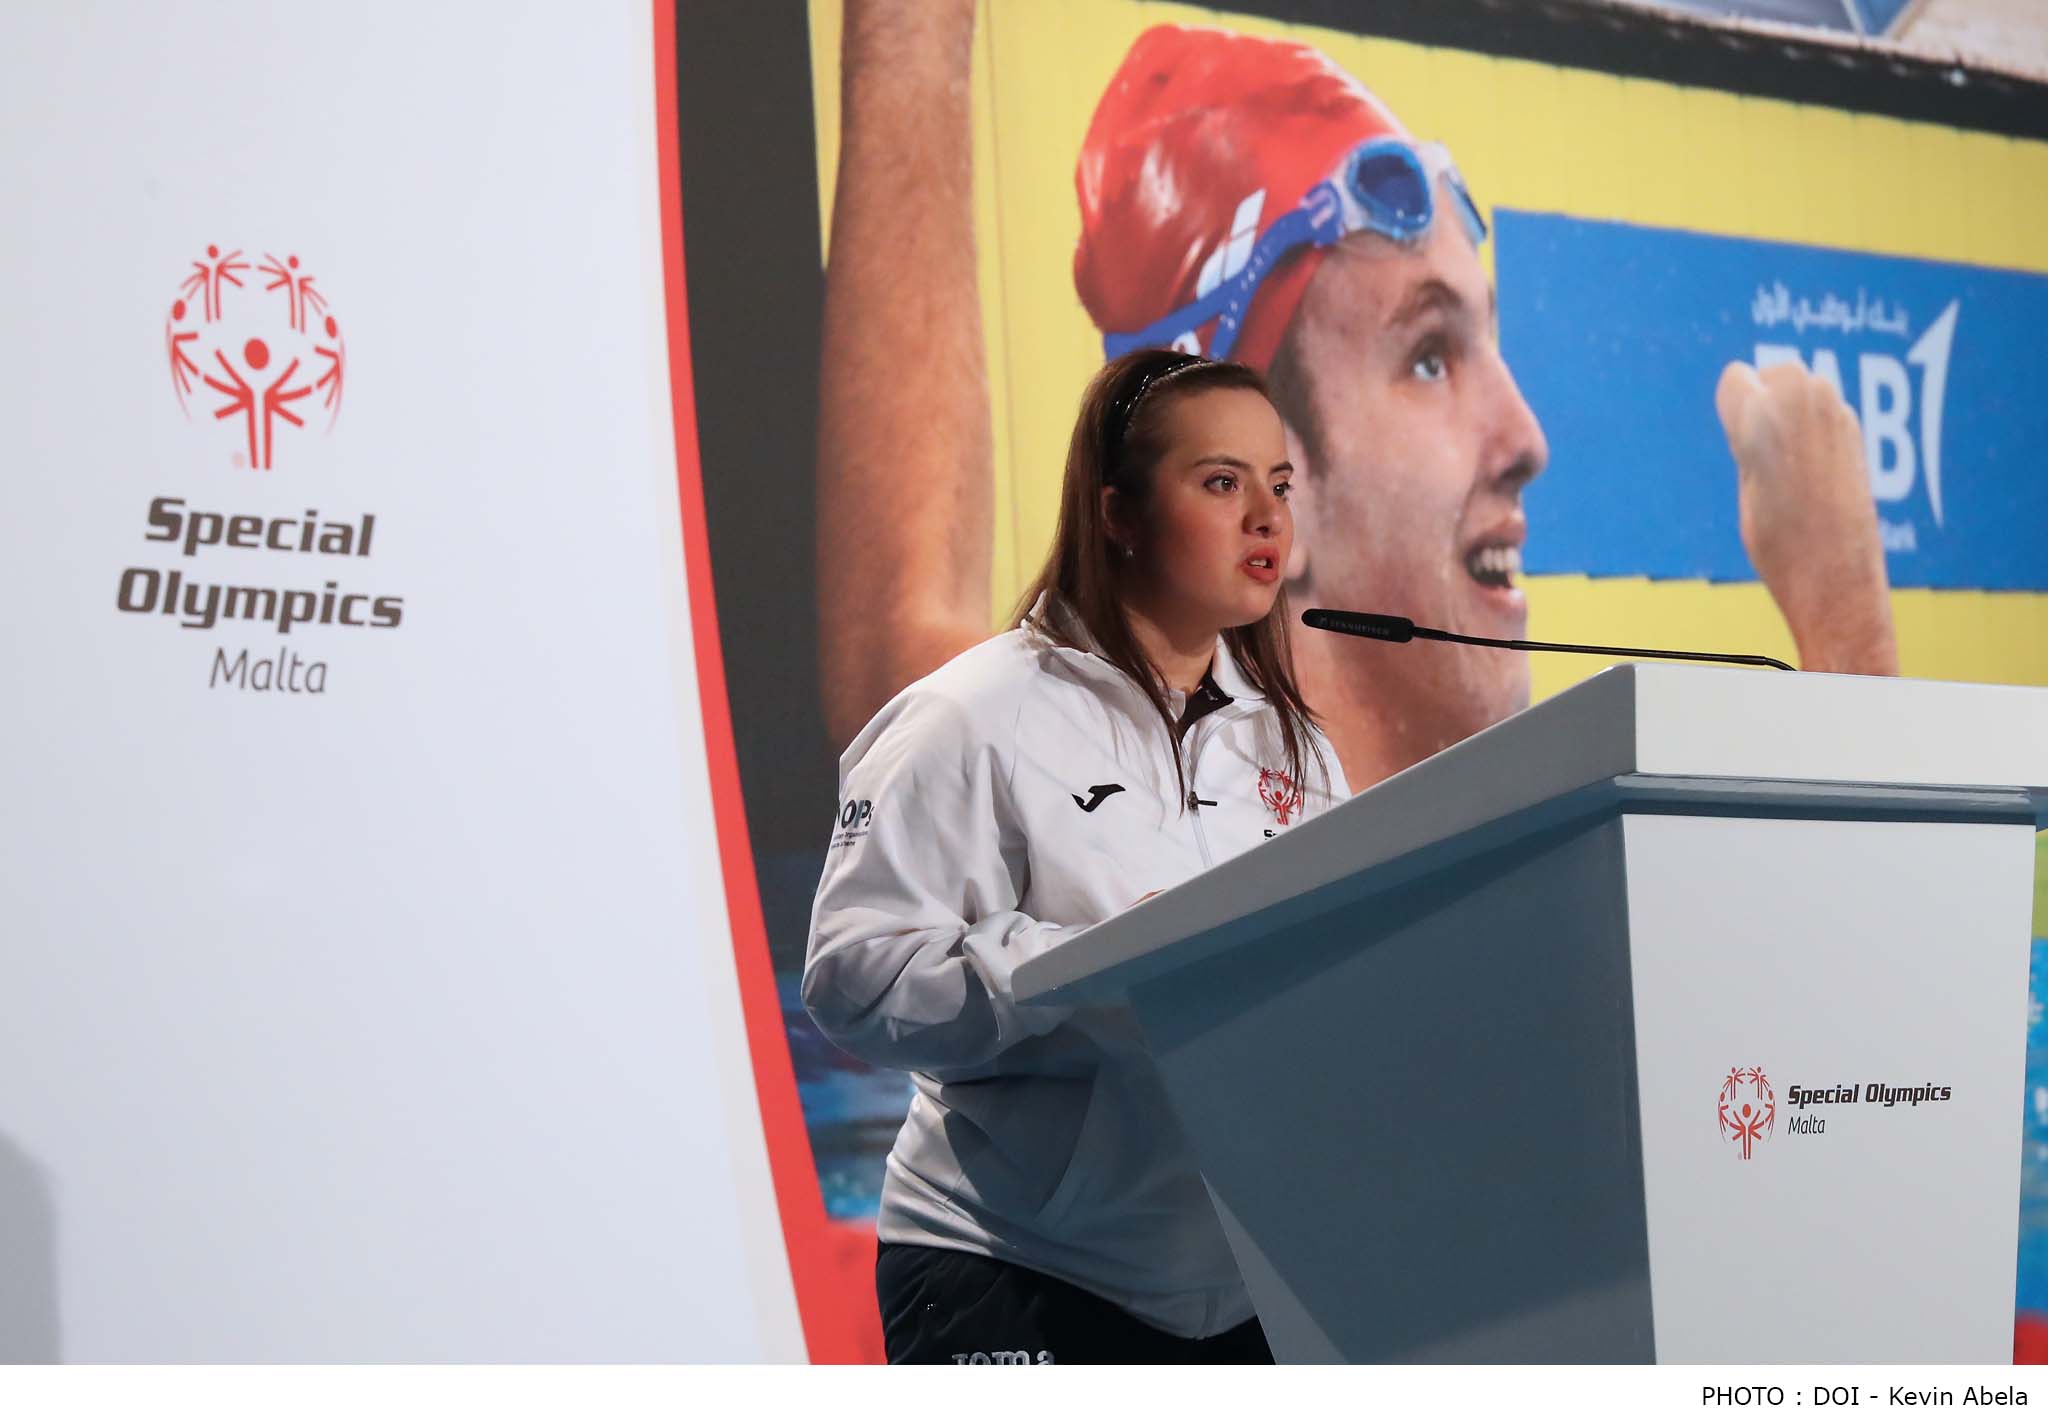 : A young woman speaks into a microphone on a podium with the Special Olympics Malta logo on the podium and in the background. 